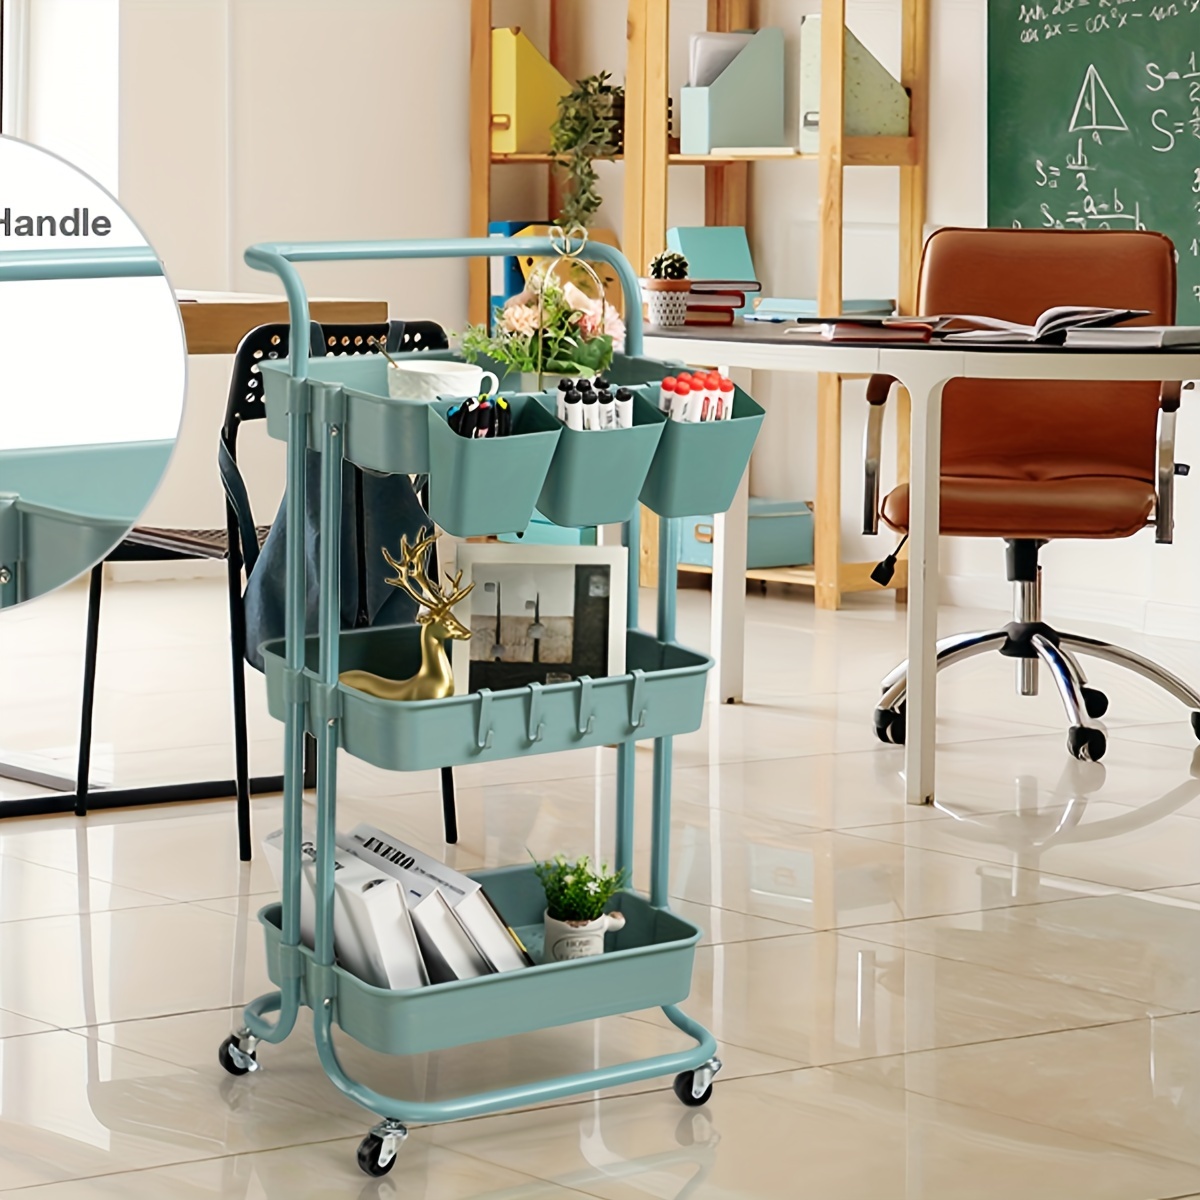 

3 Tier Rolling Utility Cart With Lockable Wheels & Hanging Cups & Hooks Storage Organization Shelves For Kitchen, Bathroom, Office, Library, Coffee Bar Trolley Service Cart, Granite Green